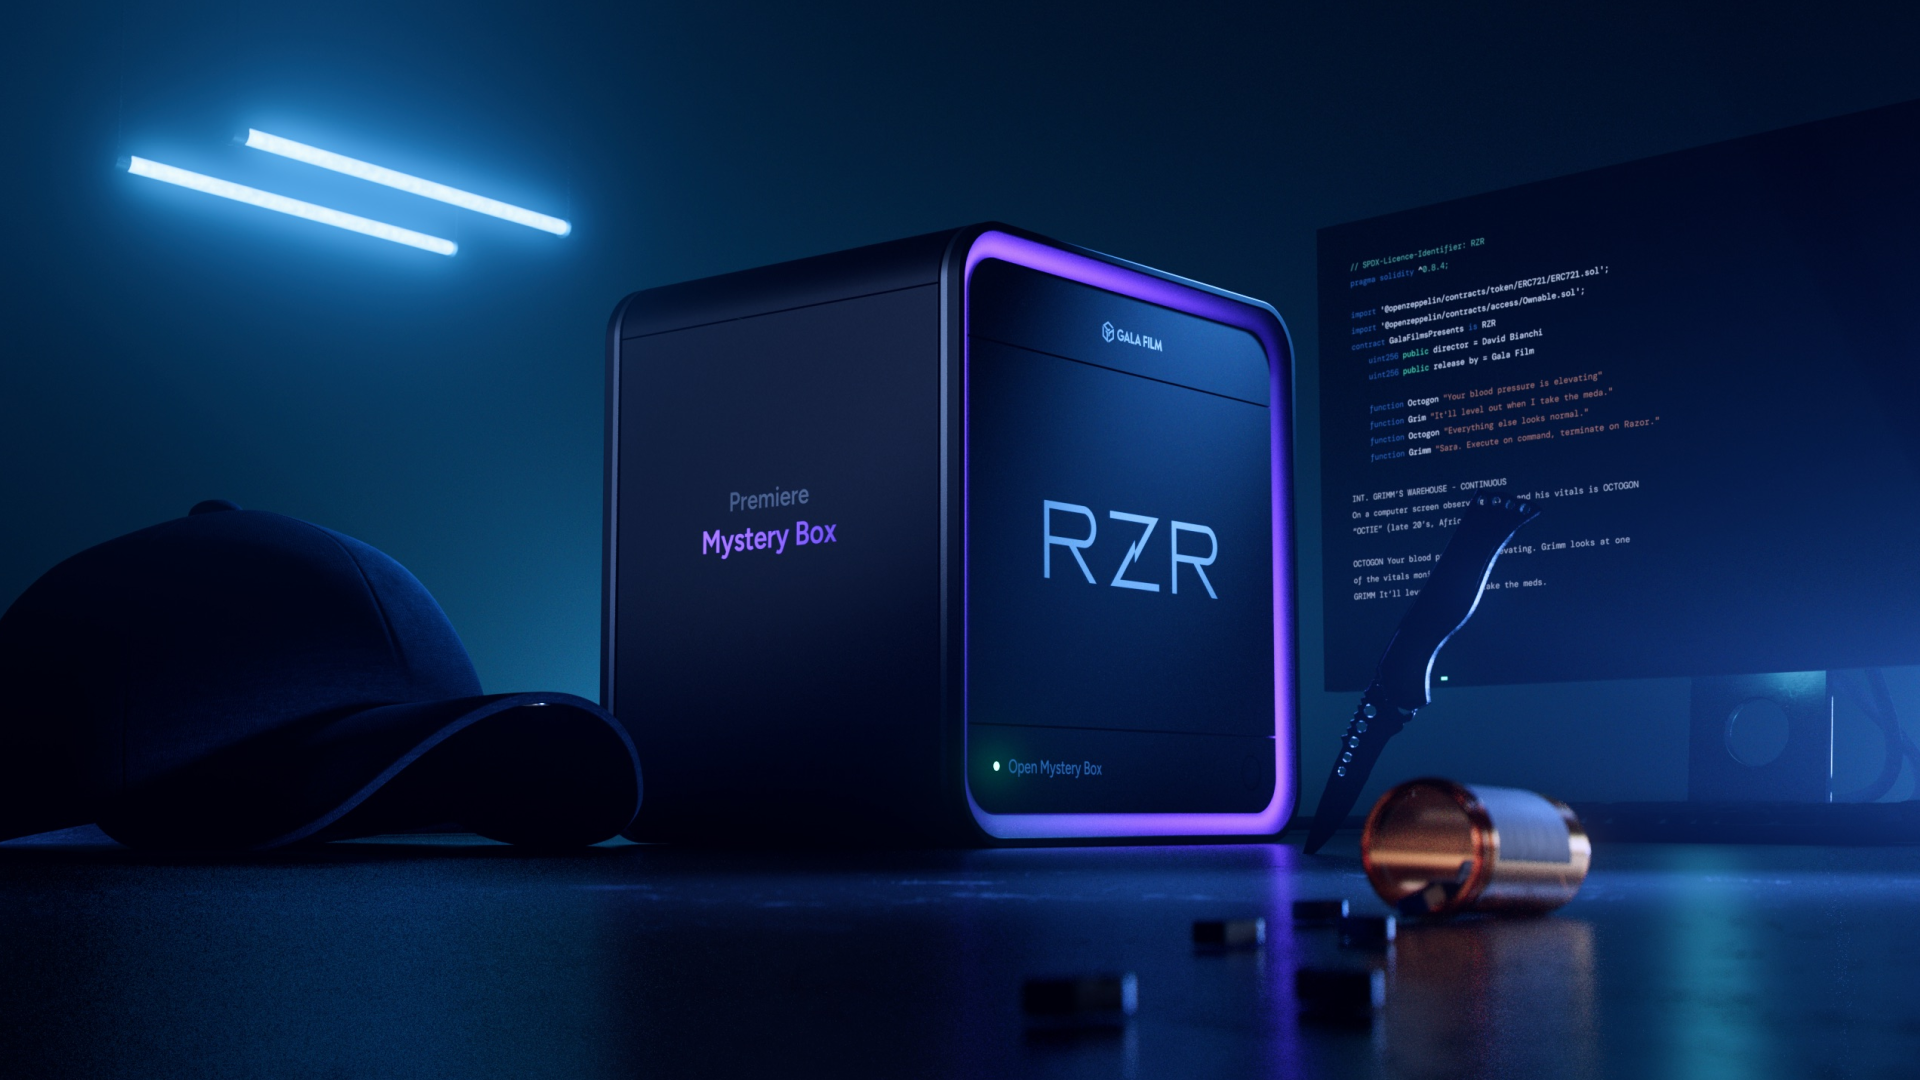 Gala Film is taking you deeper into your favorite films and series. Unpack Mystery Boxes to assemble Shards into Director Cuts, unlocking additional content, prize opportunities and more for RZR.